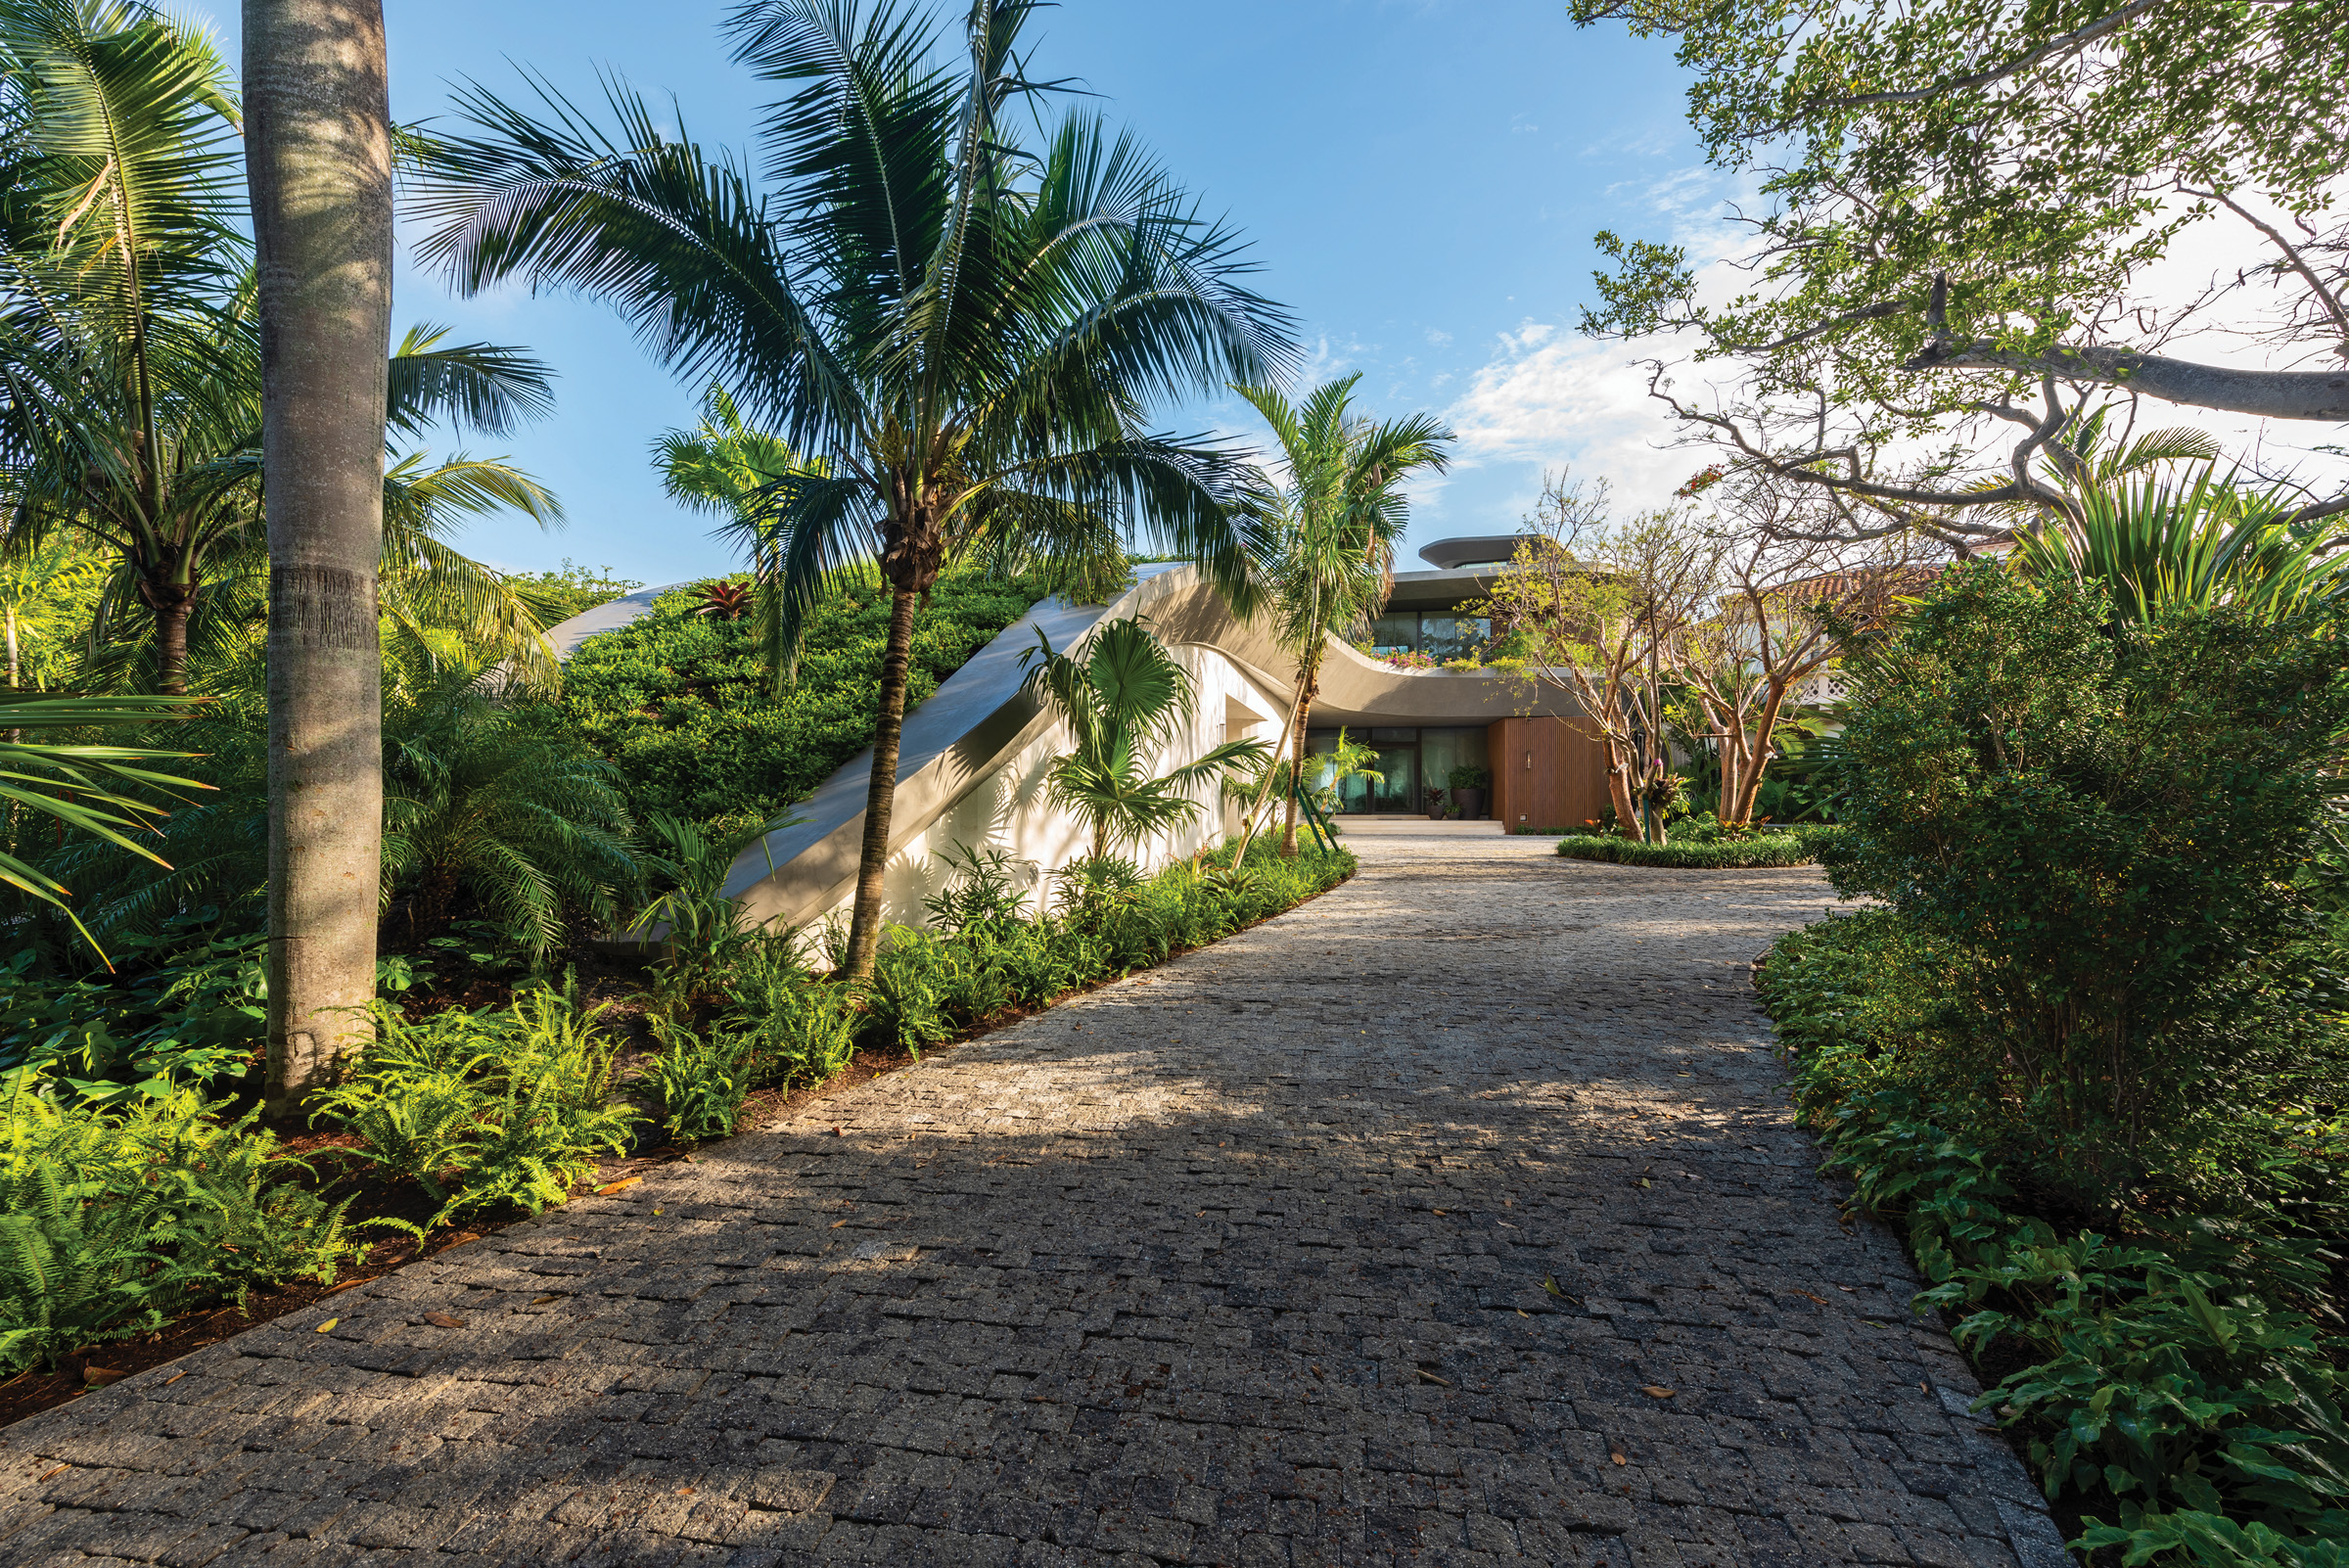 “The driveway leading to the home is composed of granite cobblestone,” says Cawley. “The stone’s split sides have a characteristic rough edge and surface, which creates a distinctive appearance.” The road is flanked by coconut palms, gumbo-limbo trees, and large-leaf philodendrons.